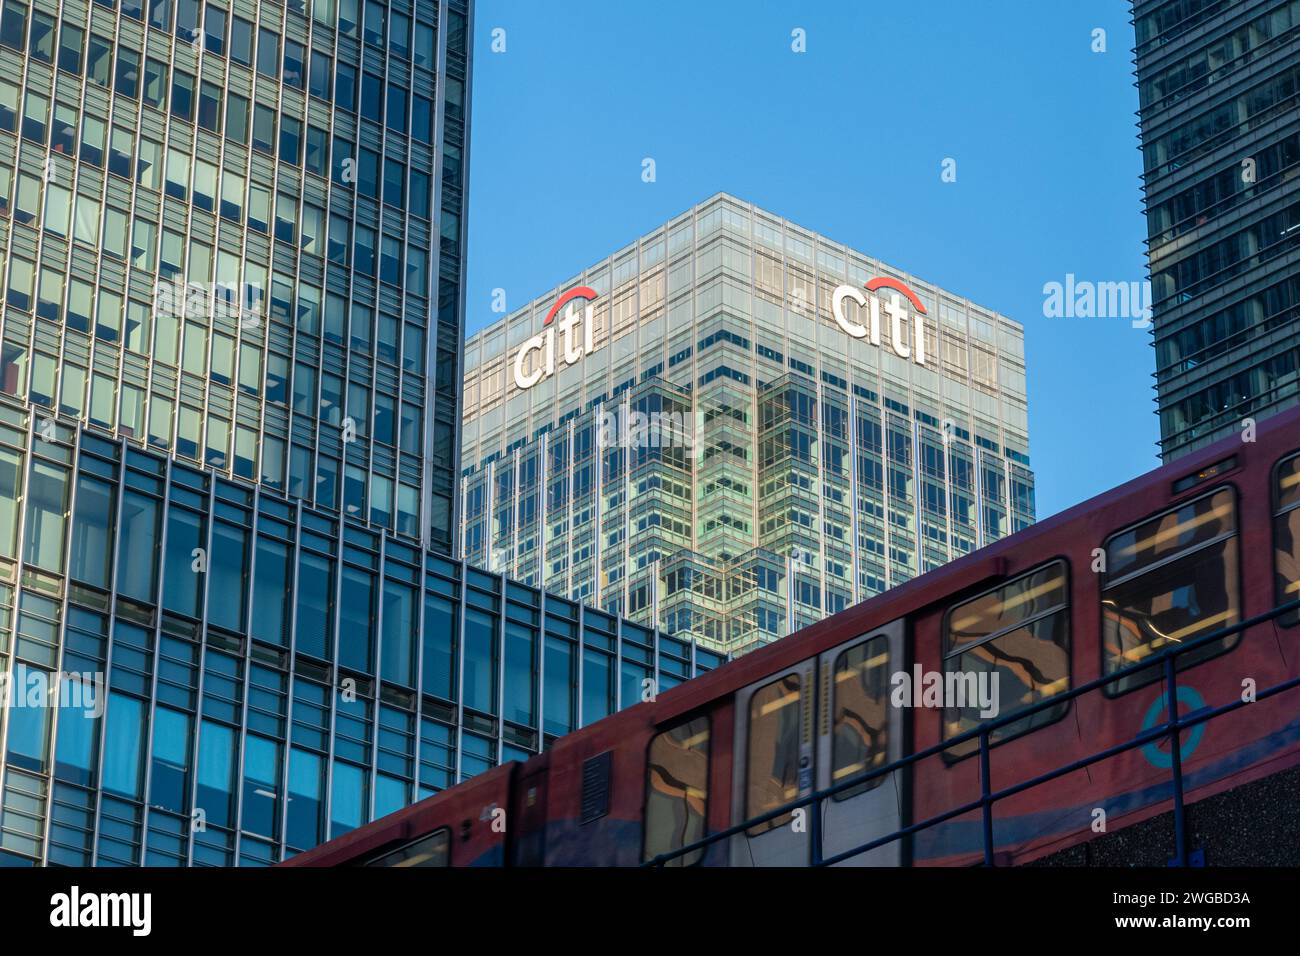 Canary Wharf skyscrapers including Citigroup HQ building (Citi sign and logo) with a DLR Docklands Light Railway train, East London, England, UK Stock Photo